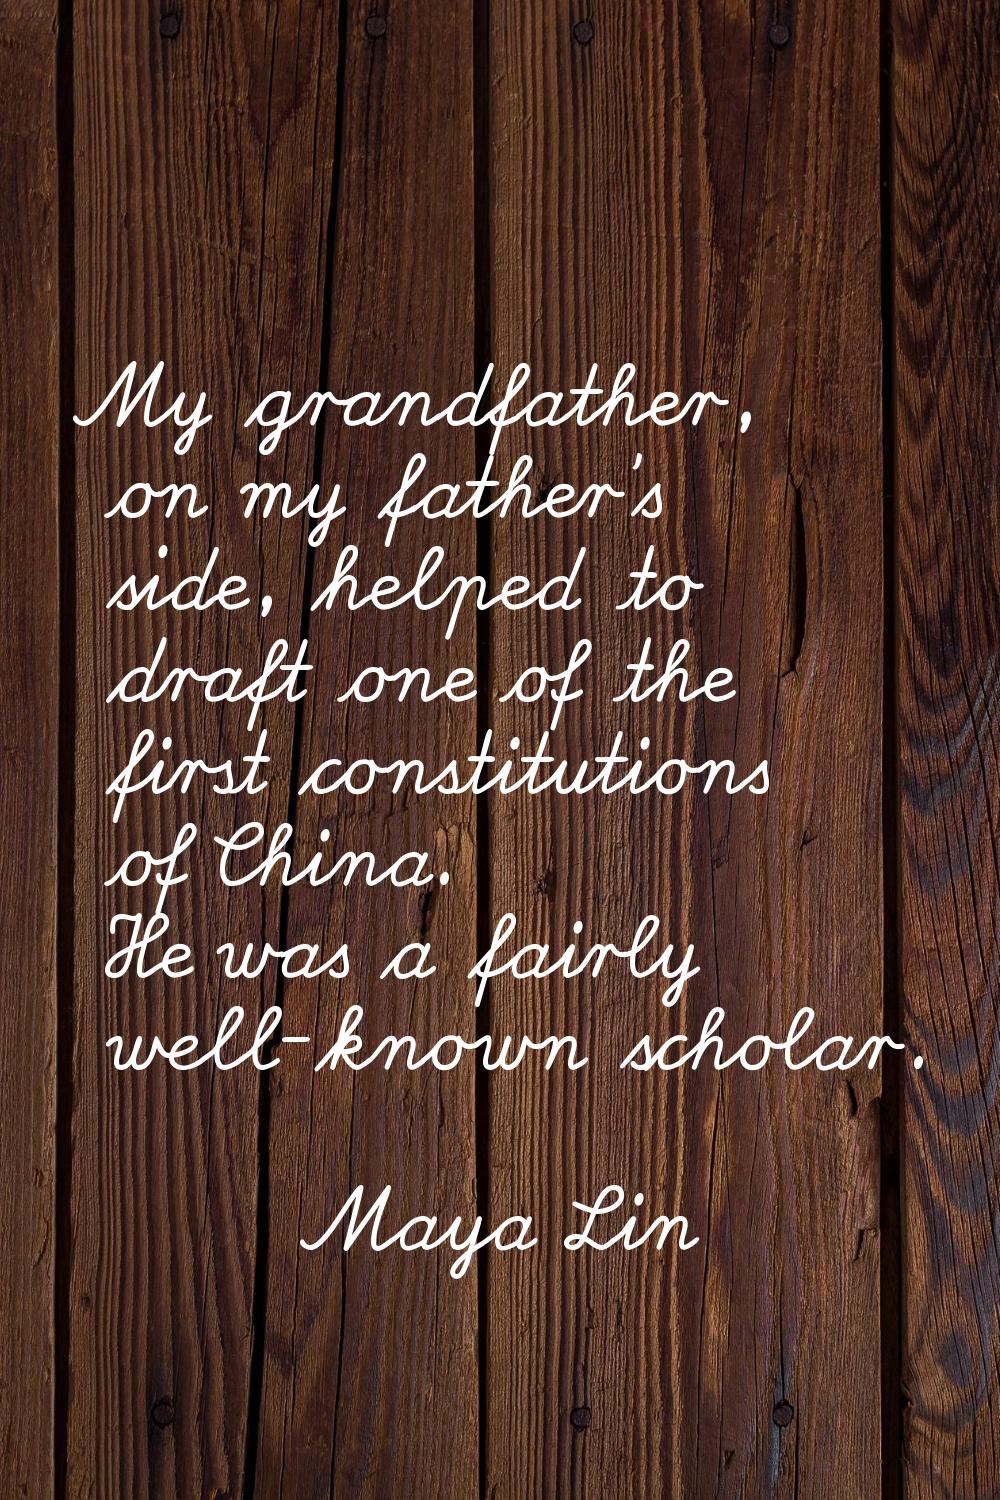 My grandfather, on my father's side, helped to draft one of the first constitutions of China. He wa